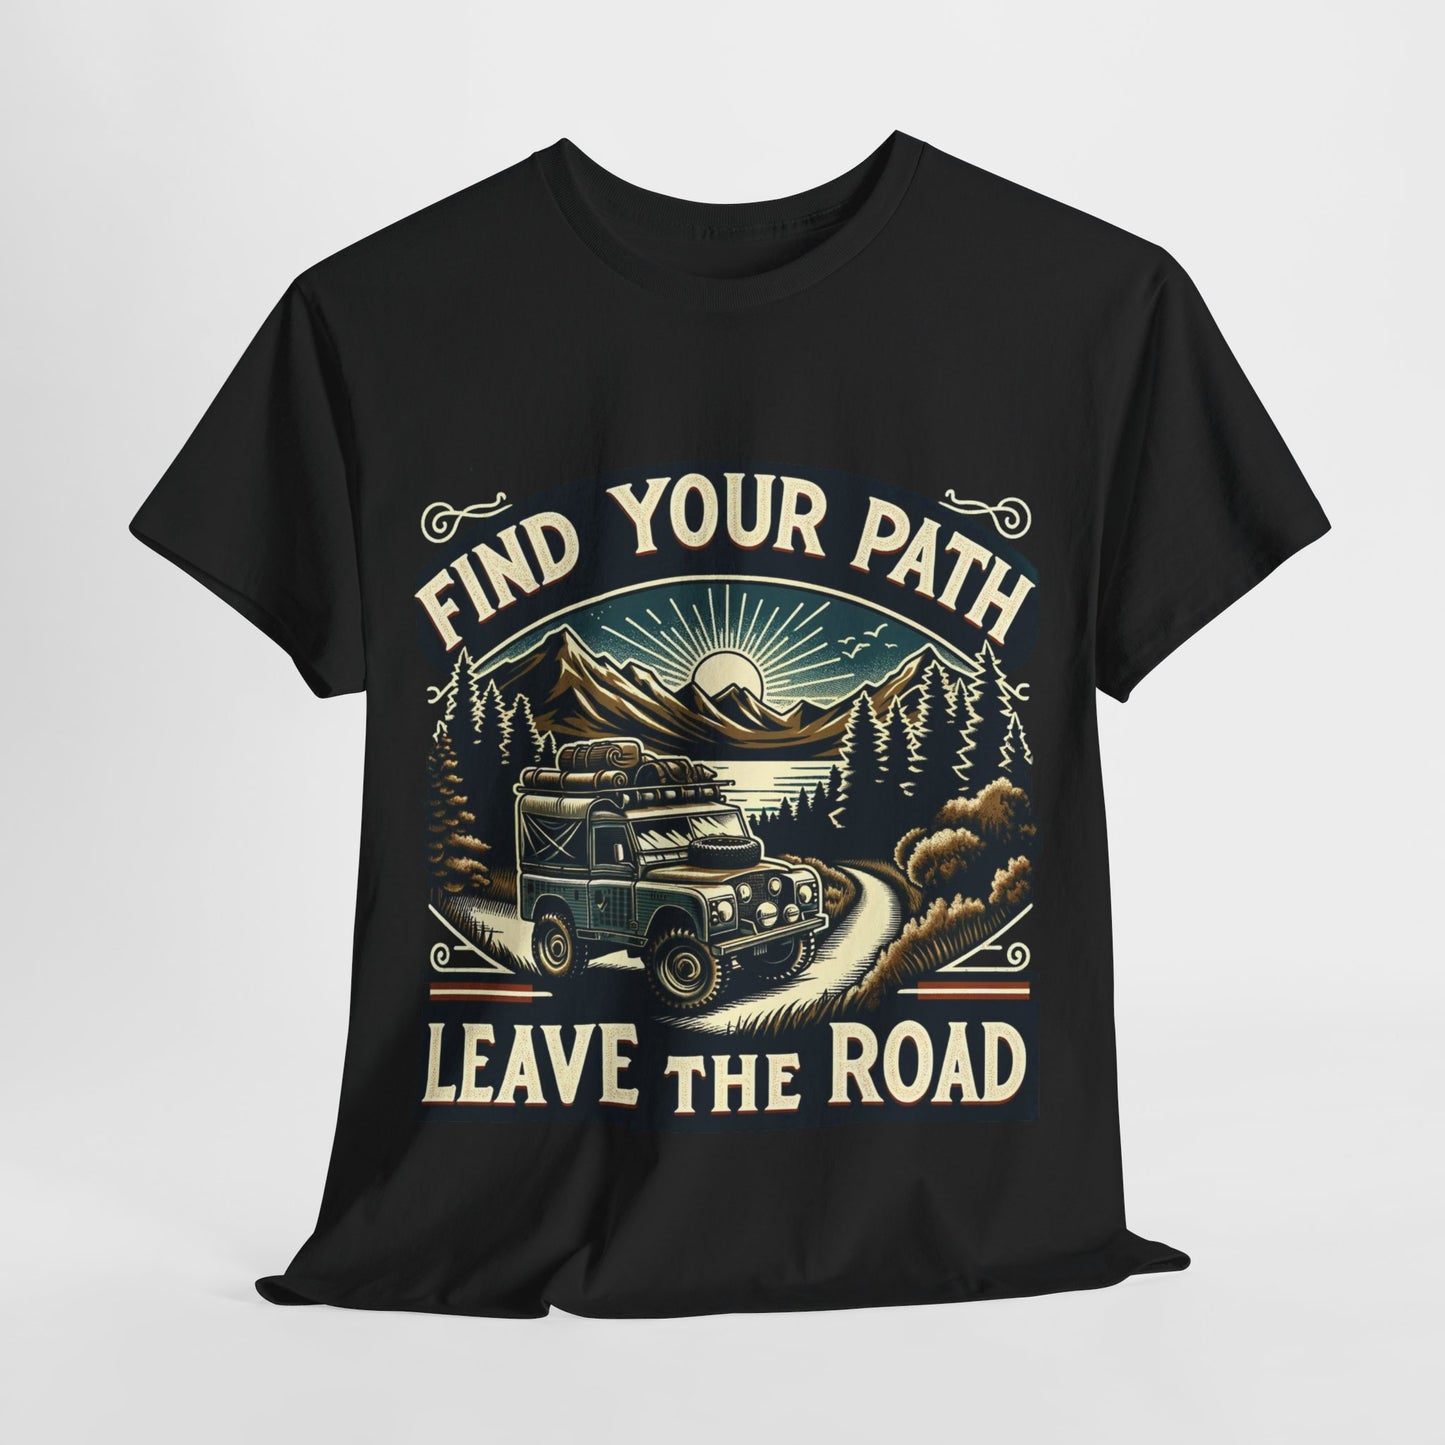 "Find Your Path, Leave the Road" T-Shirts – Perfect for Adventure Enthusiasts